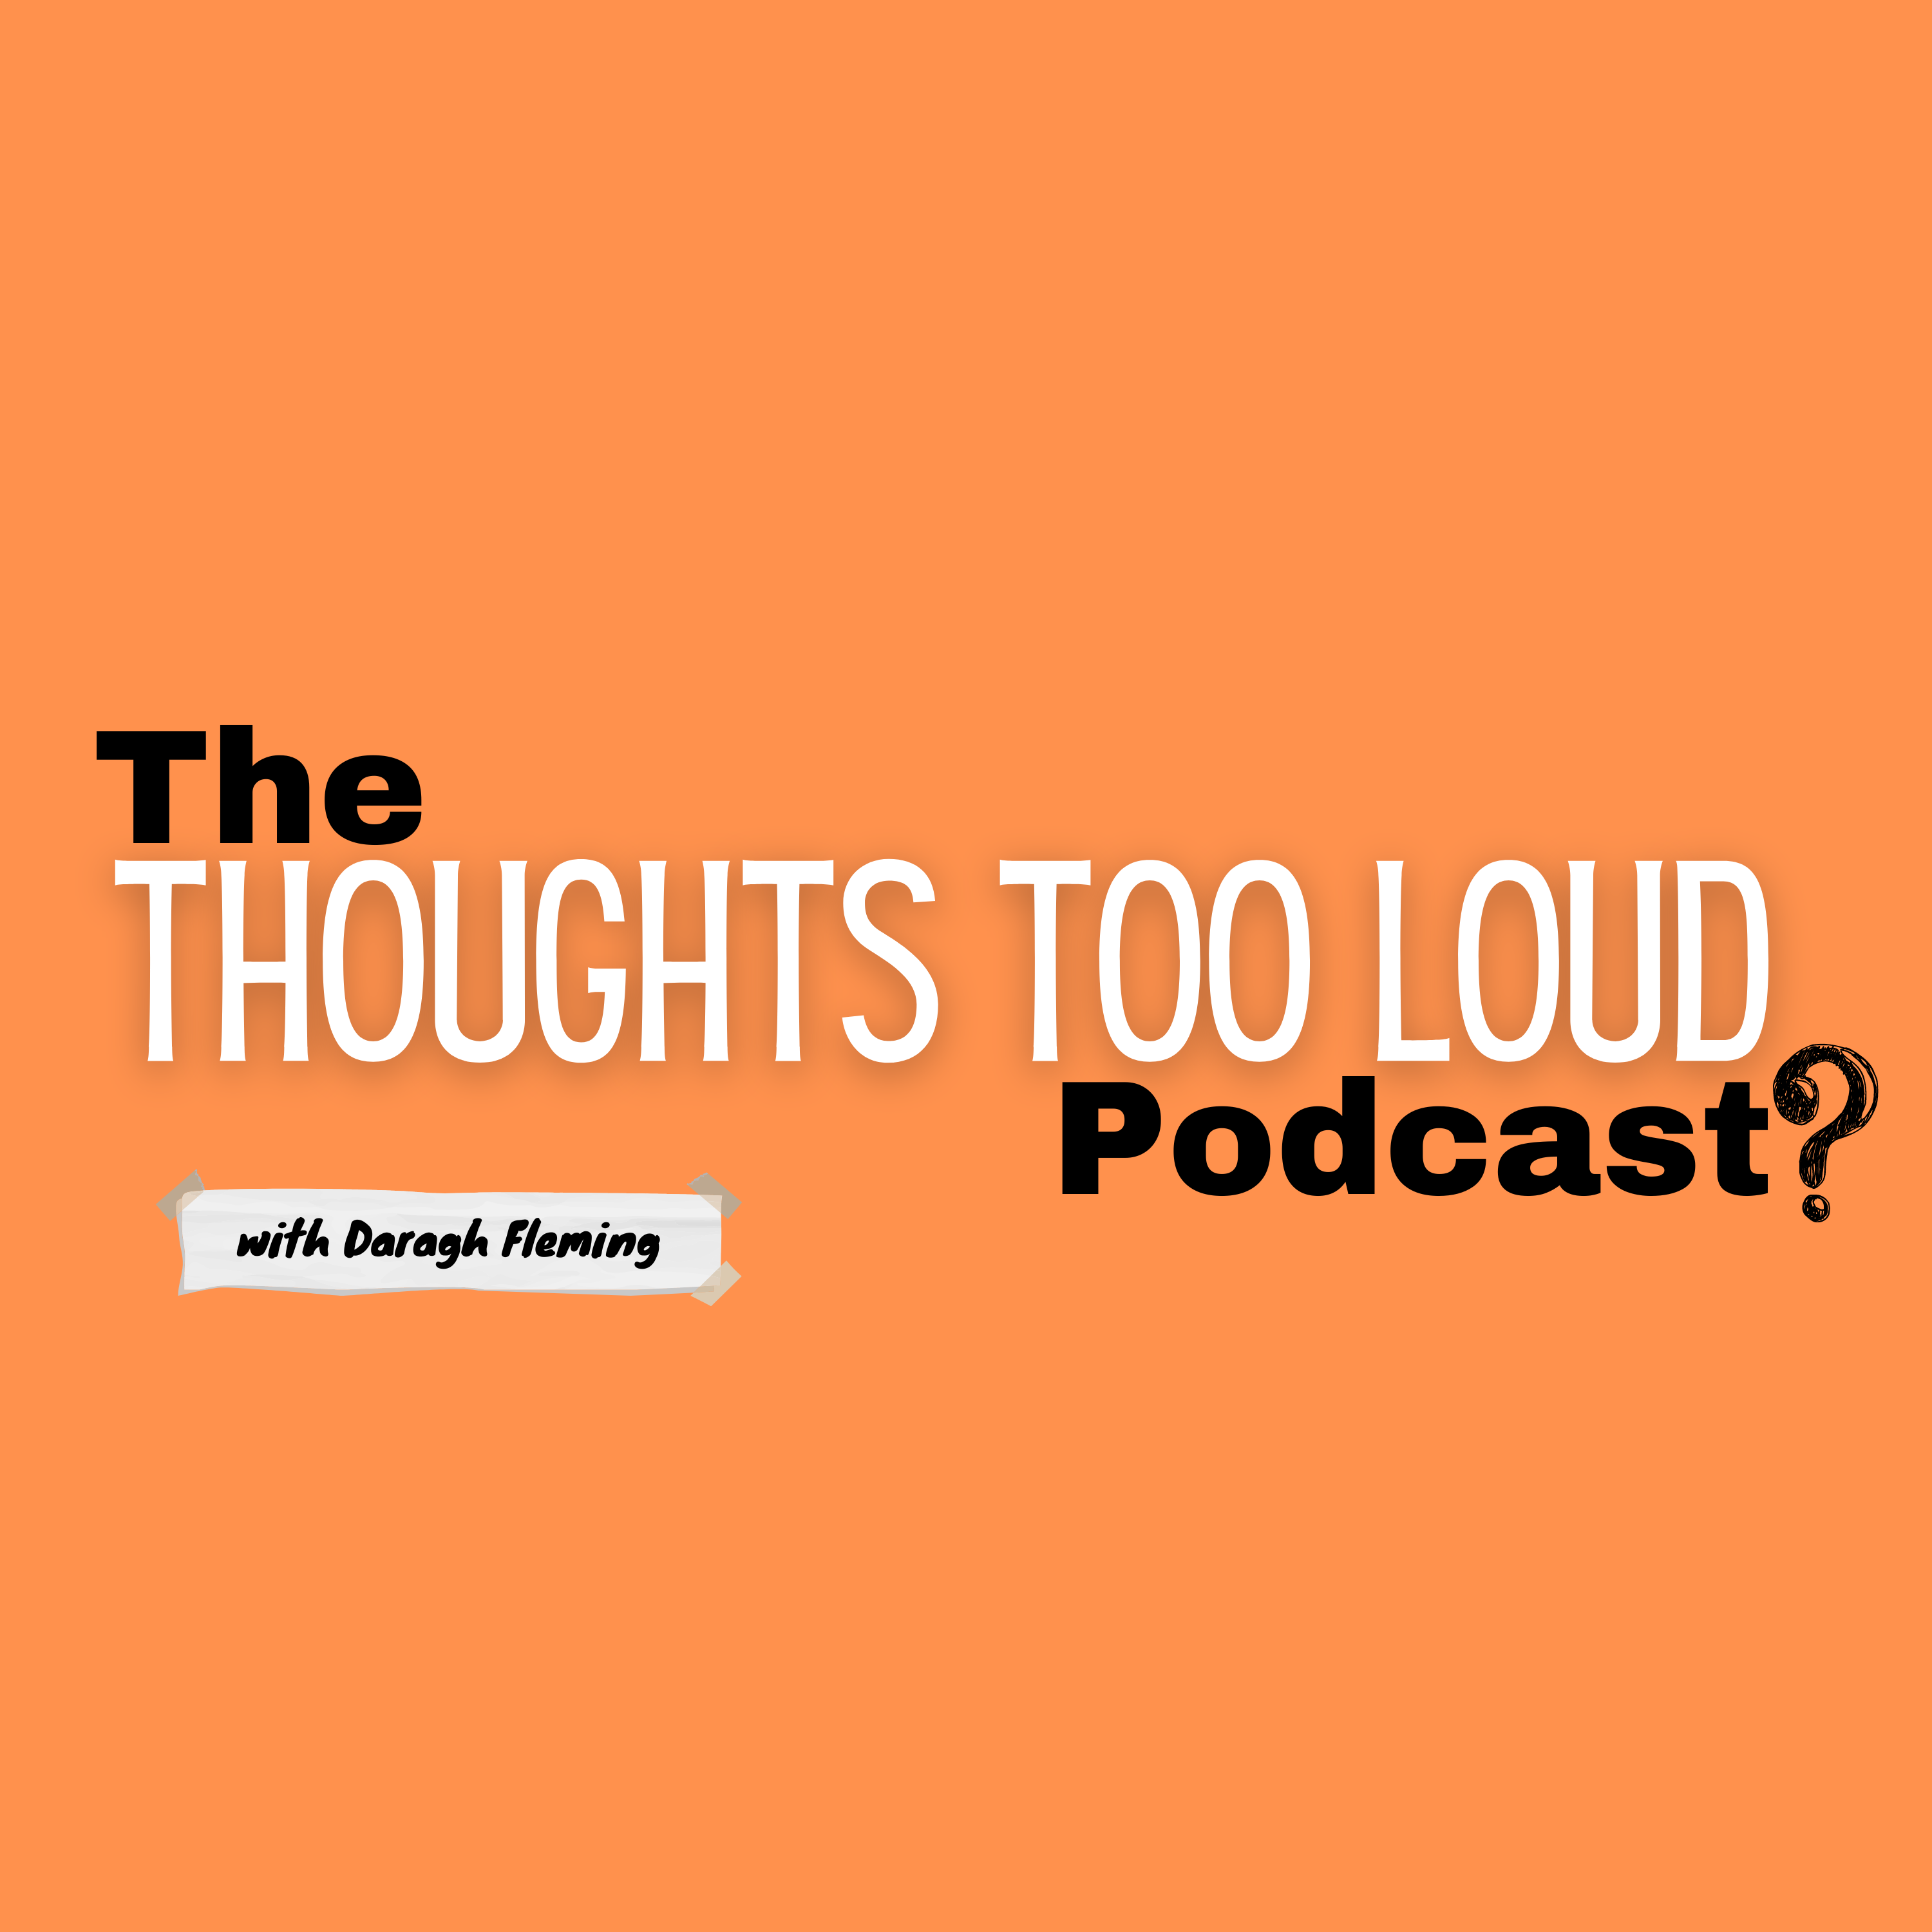 The Thoughts Too Loud Podcast